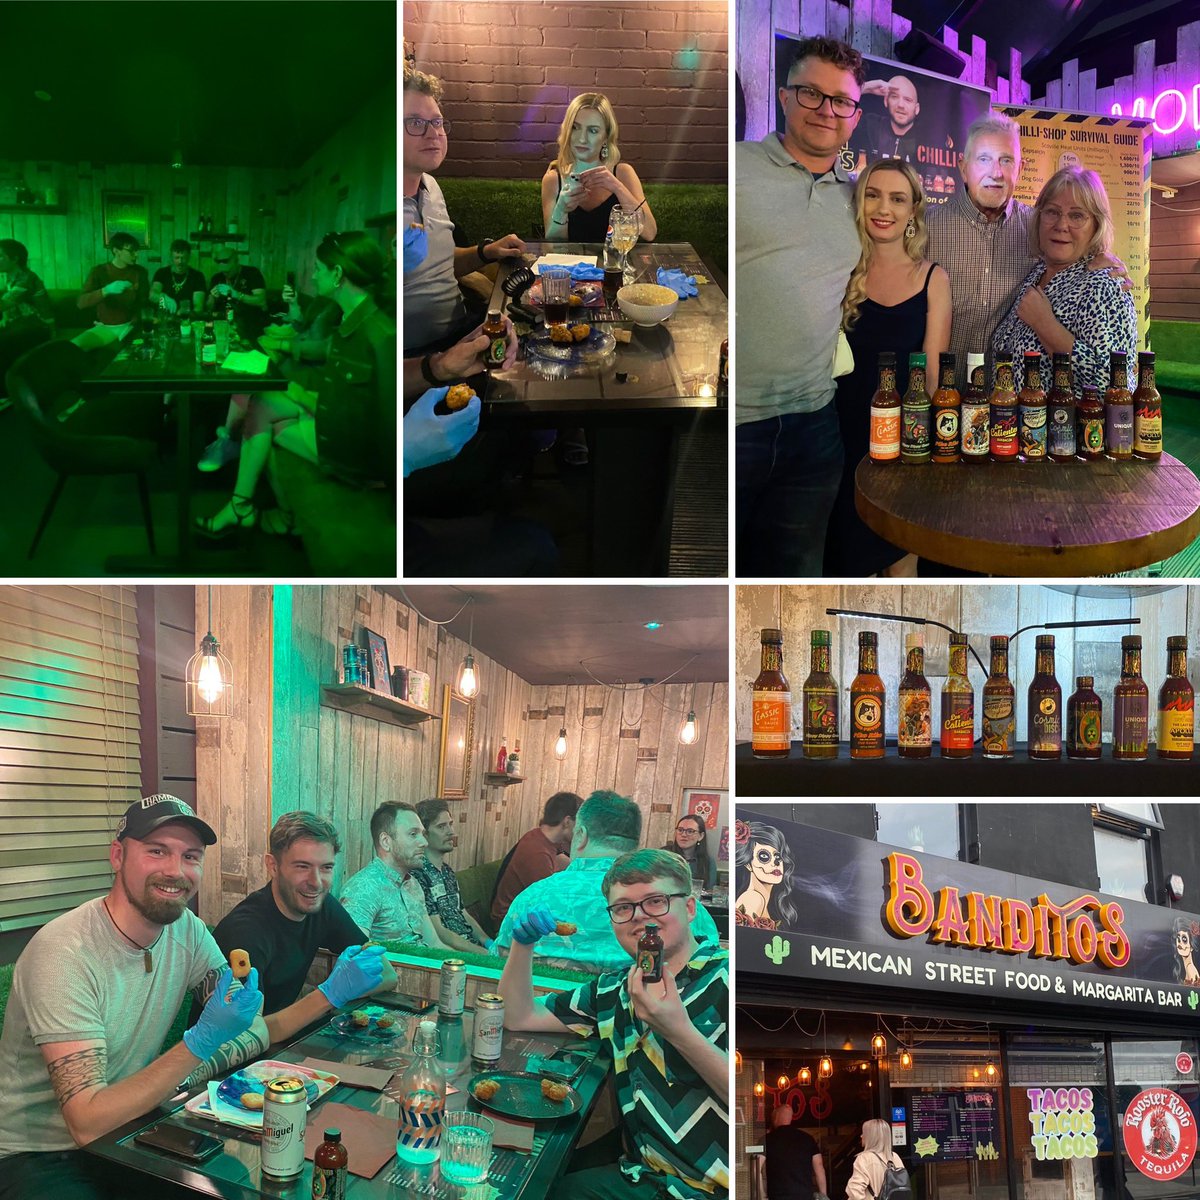 Hot Ones Experience in #Doncaster

Thurs 5th Oct at the brand new Banditos Mexican Restaurant & Bar 7pm 🍗 or  🌱 

Book
eventbrite.com/e/hots-ones-ch…

#doncasteruni #doncasteruniversitycentre #visitdoncaster #whatsondoncaster #doncasterisgreat #doncasterbusiness #doncasterrovers